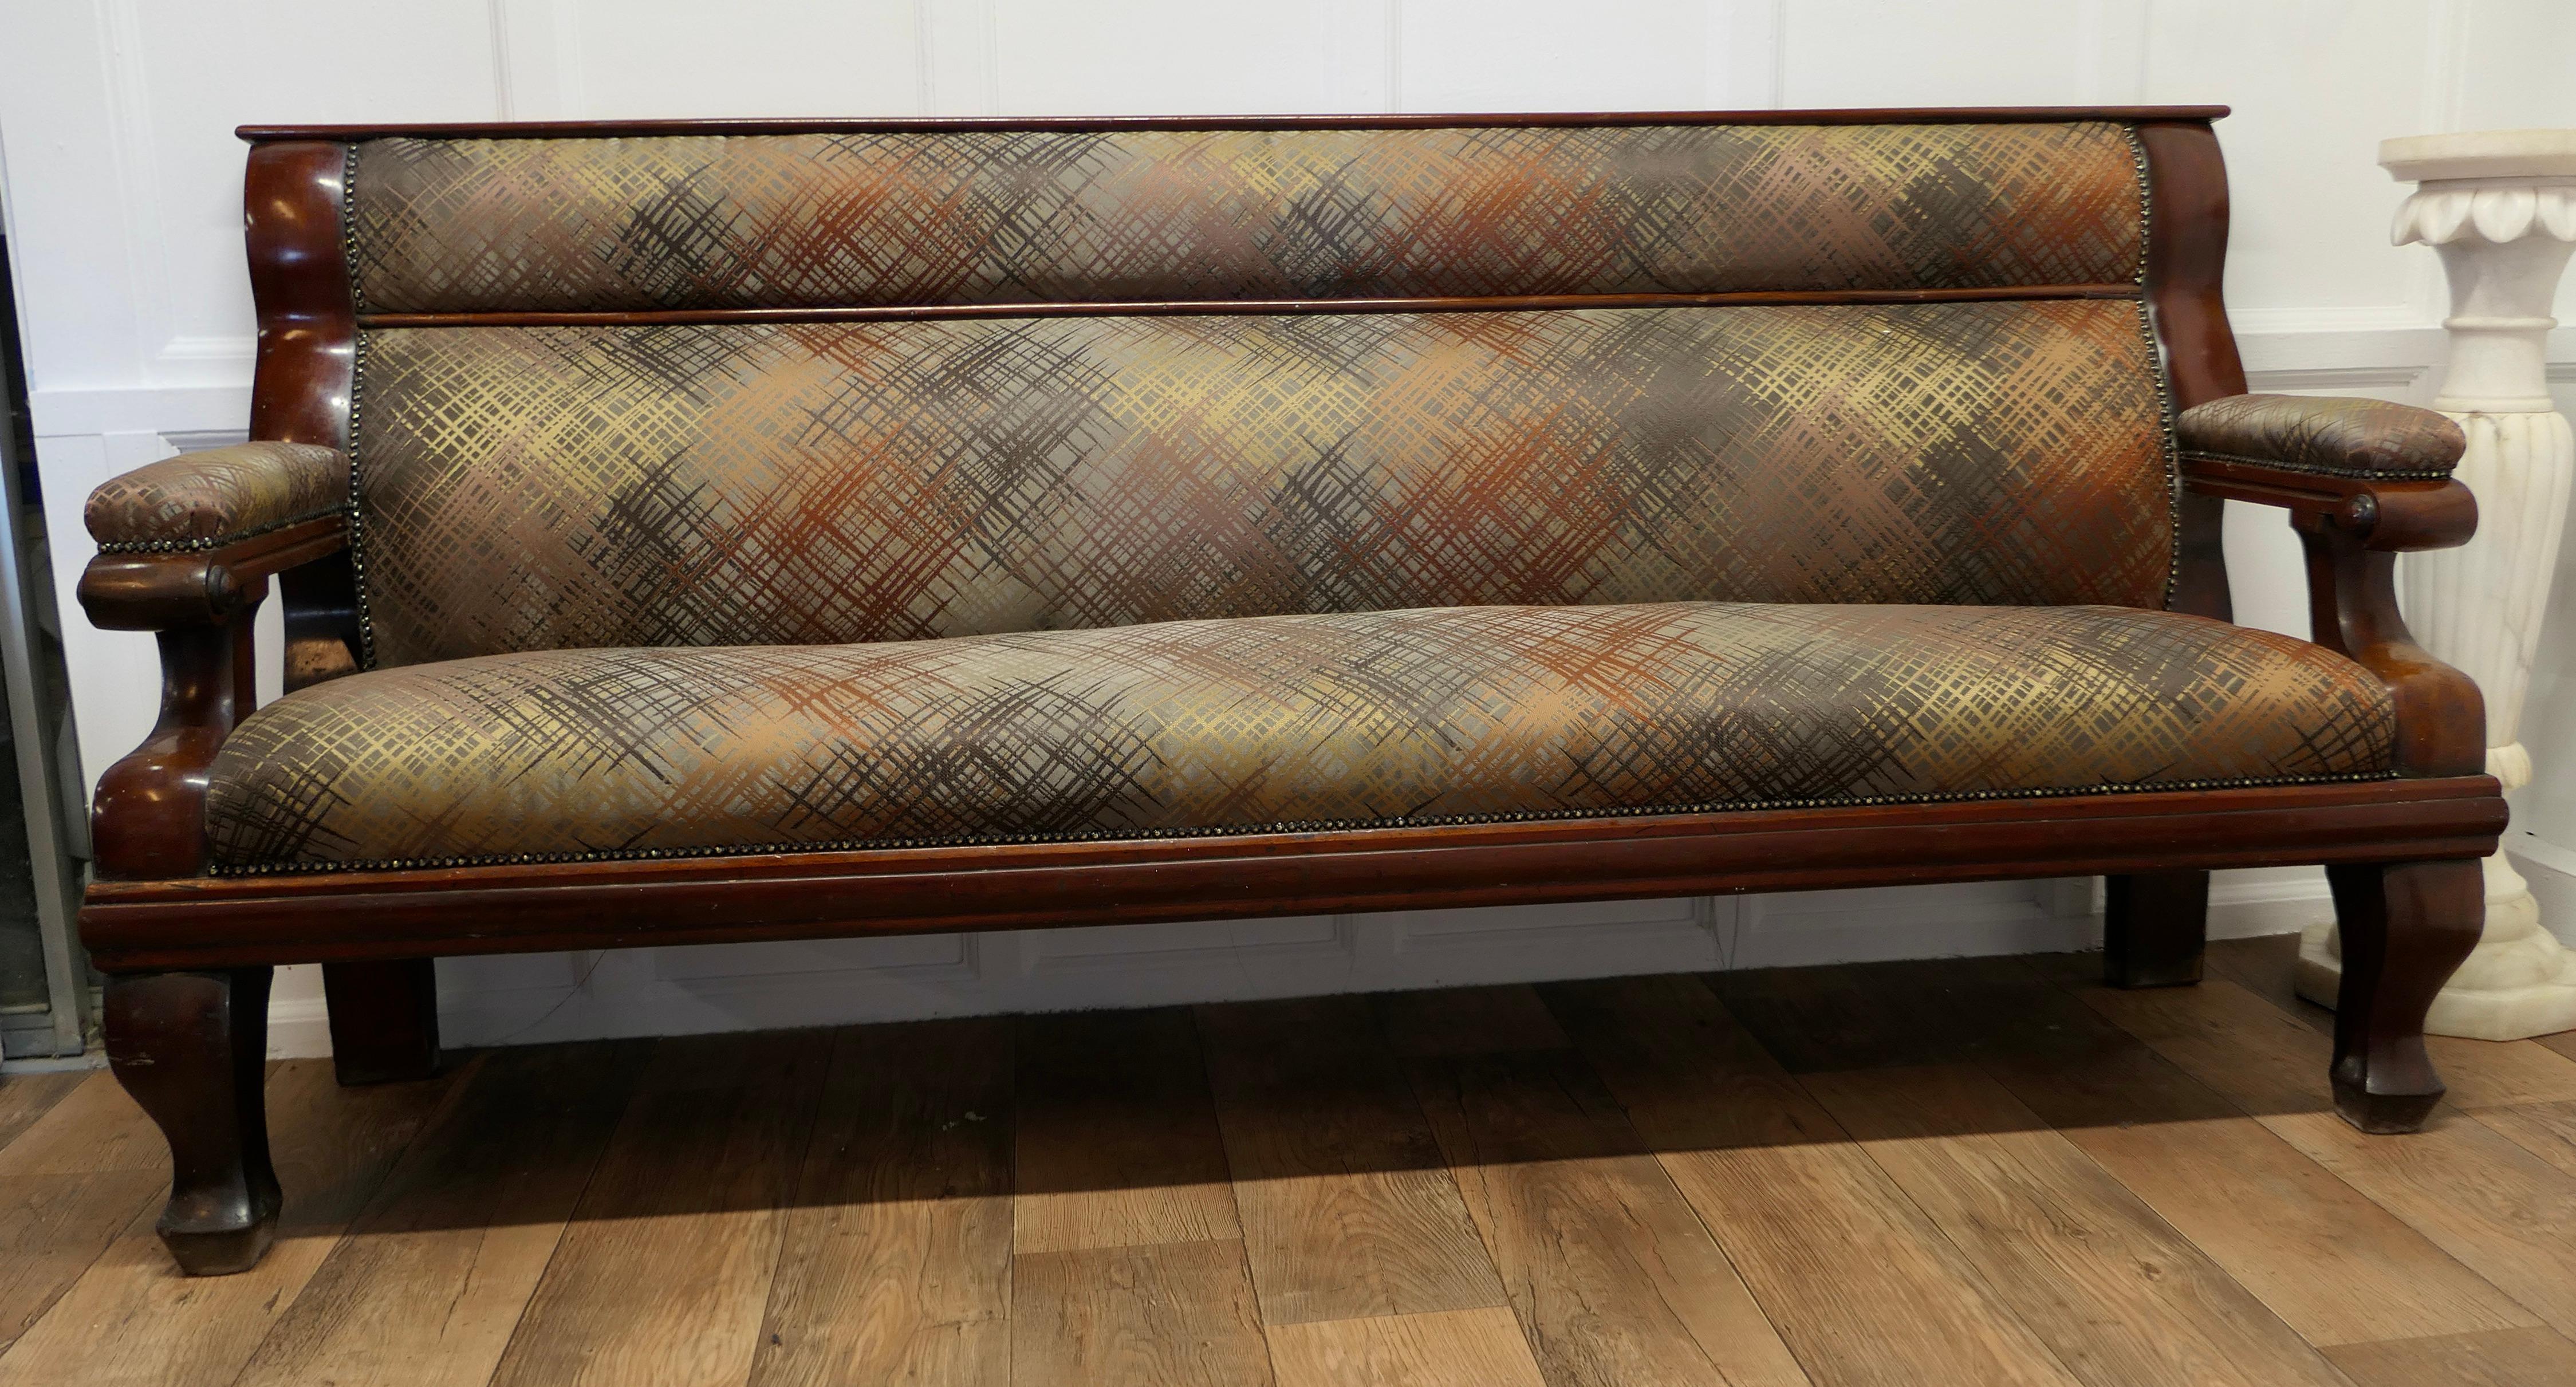 Long Waiting Room Seat or Hall Bench

This is a very sturdy and heavy piece, the back and seat are newly upholstered, in an abstract design in autumn colours
The bench has a long seat with upholstered arms at each end and a panelled back

This